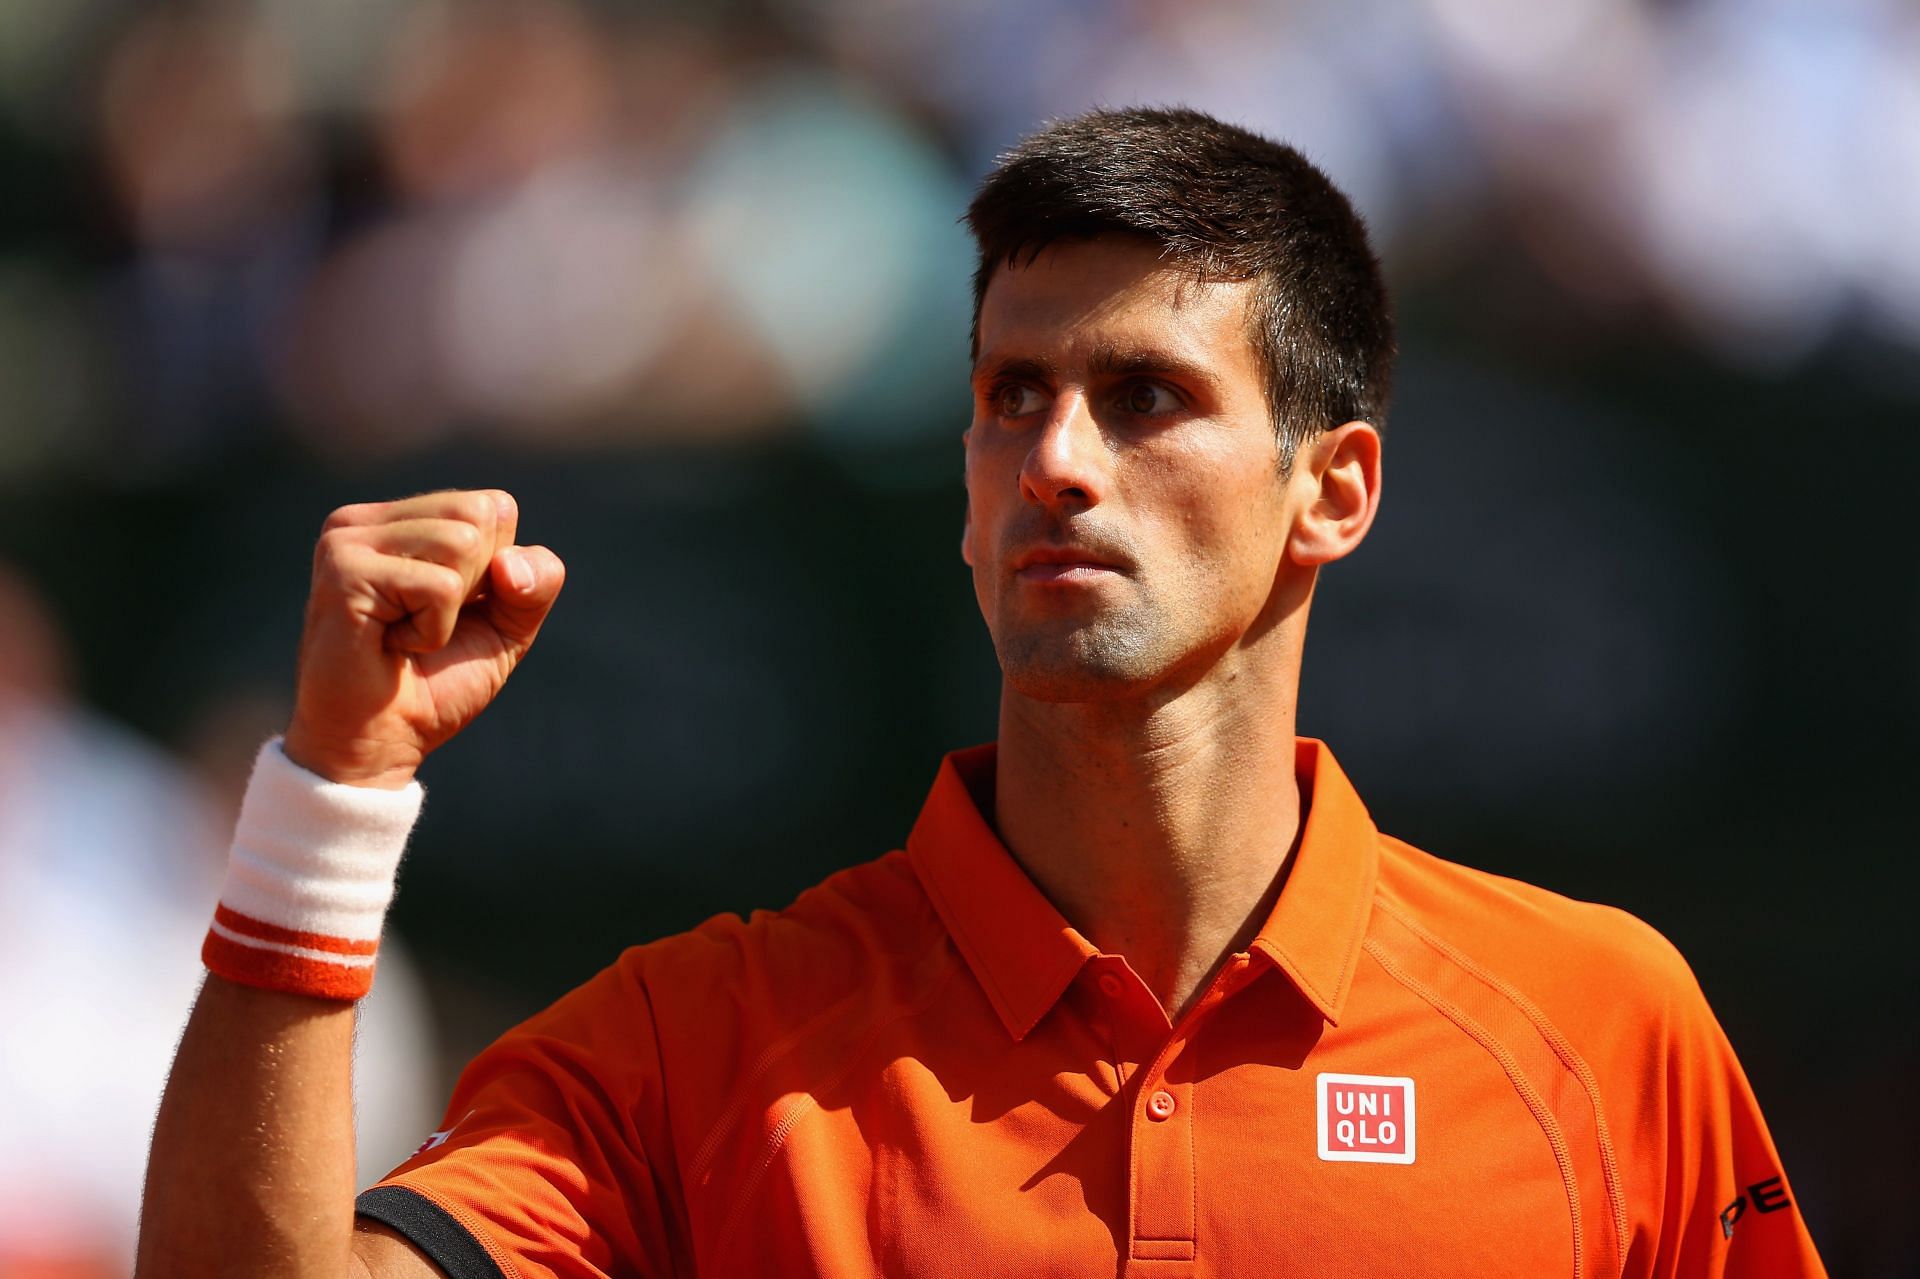 Djokovic reacts during his 2015 French Open quarterfinal with Nadal